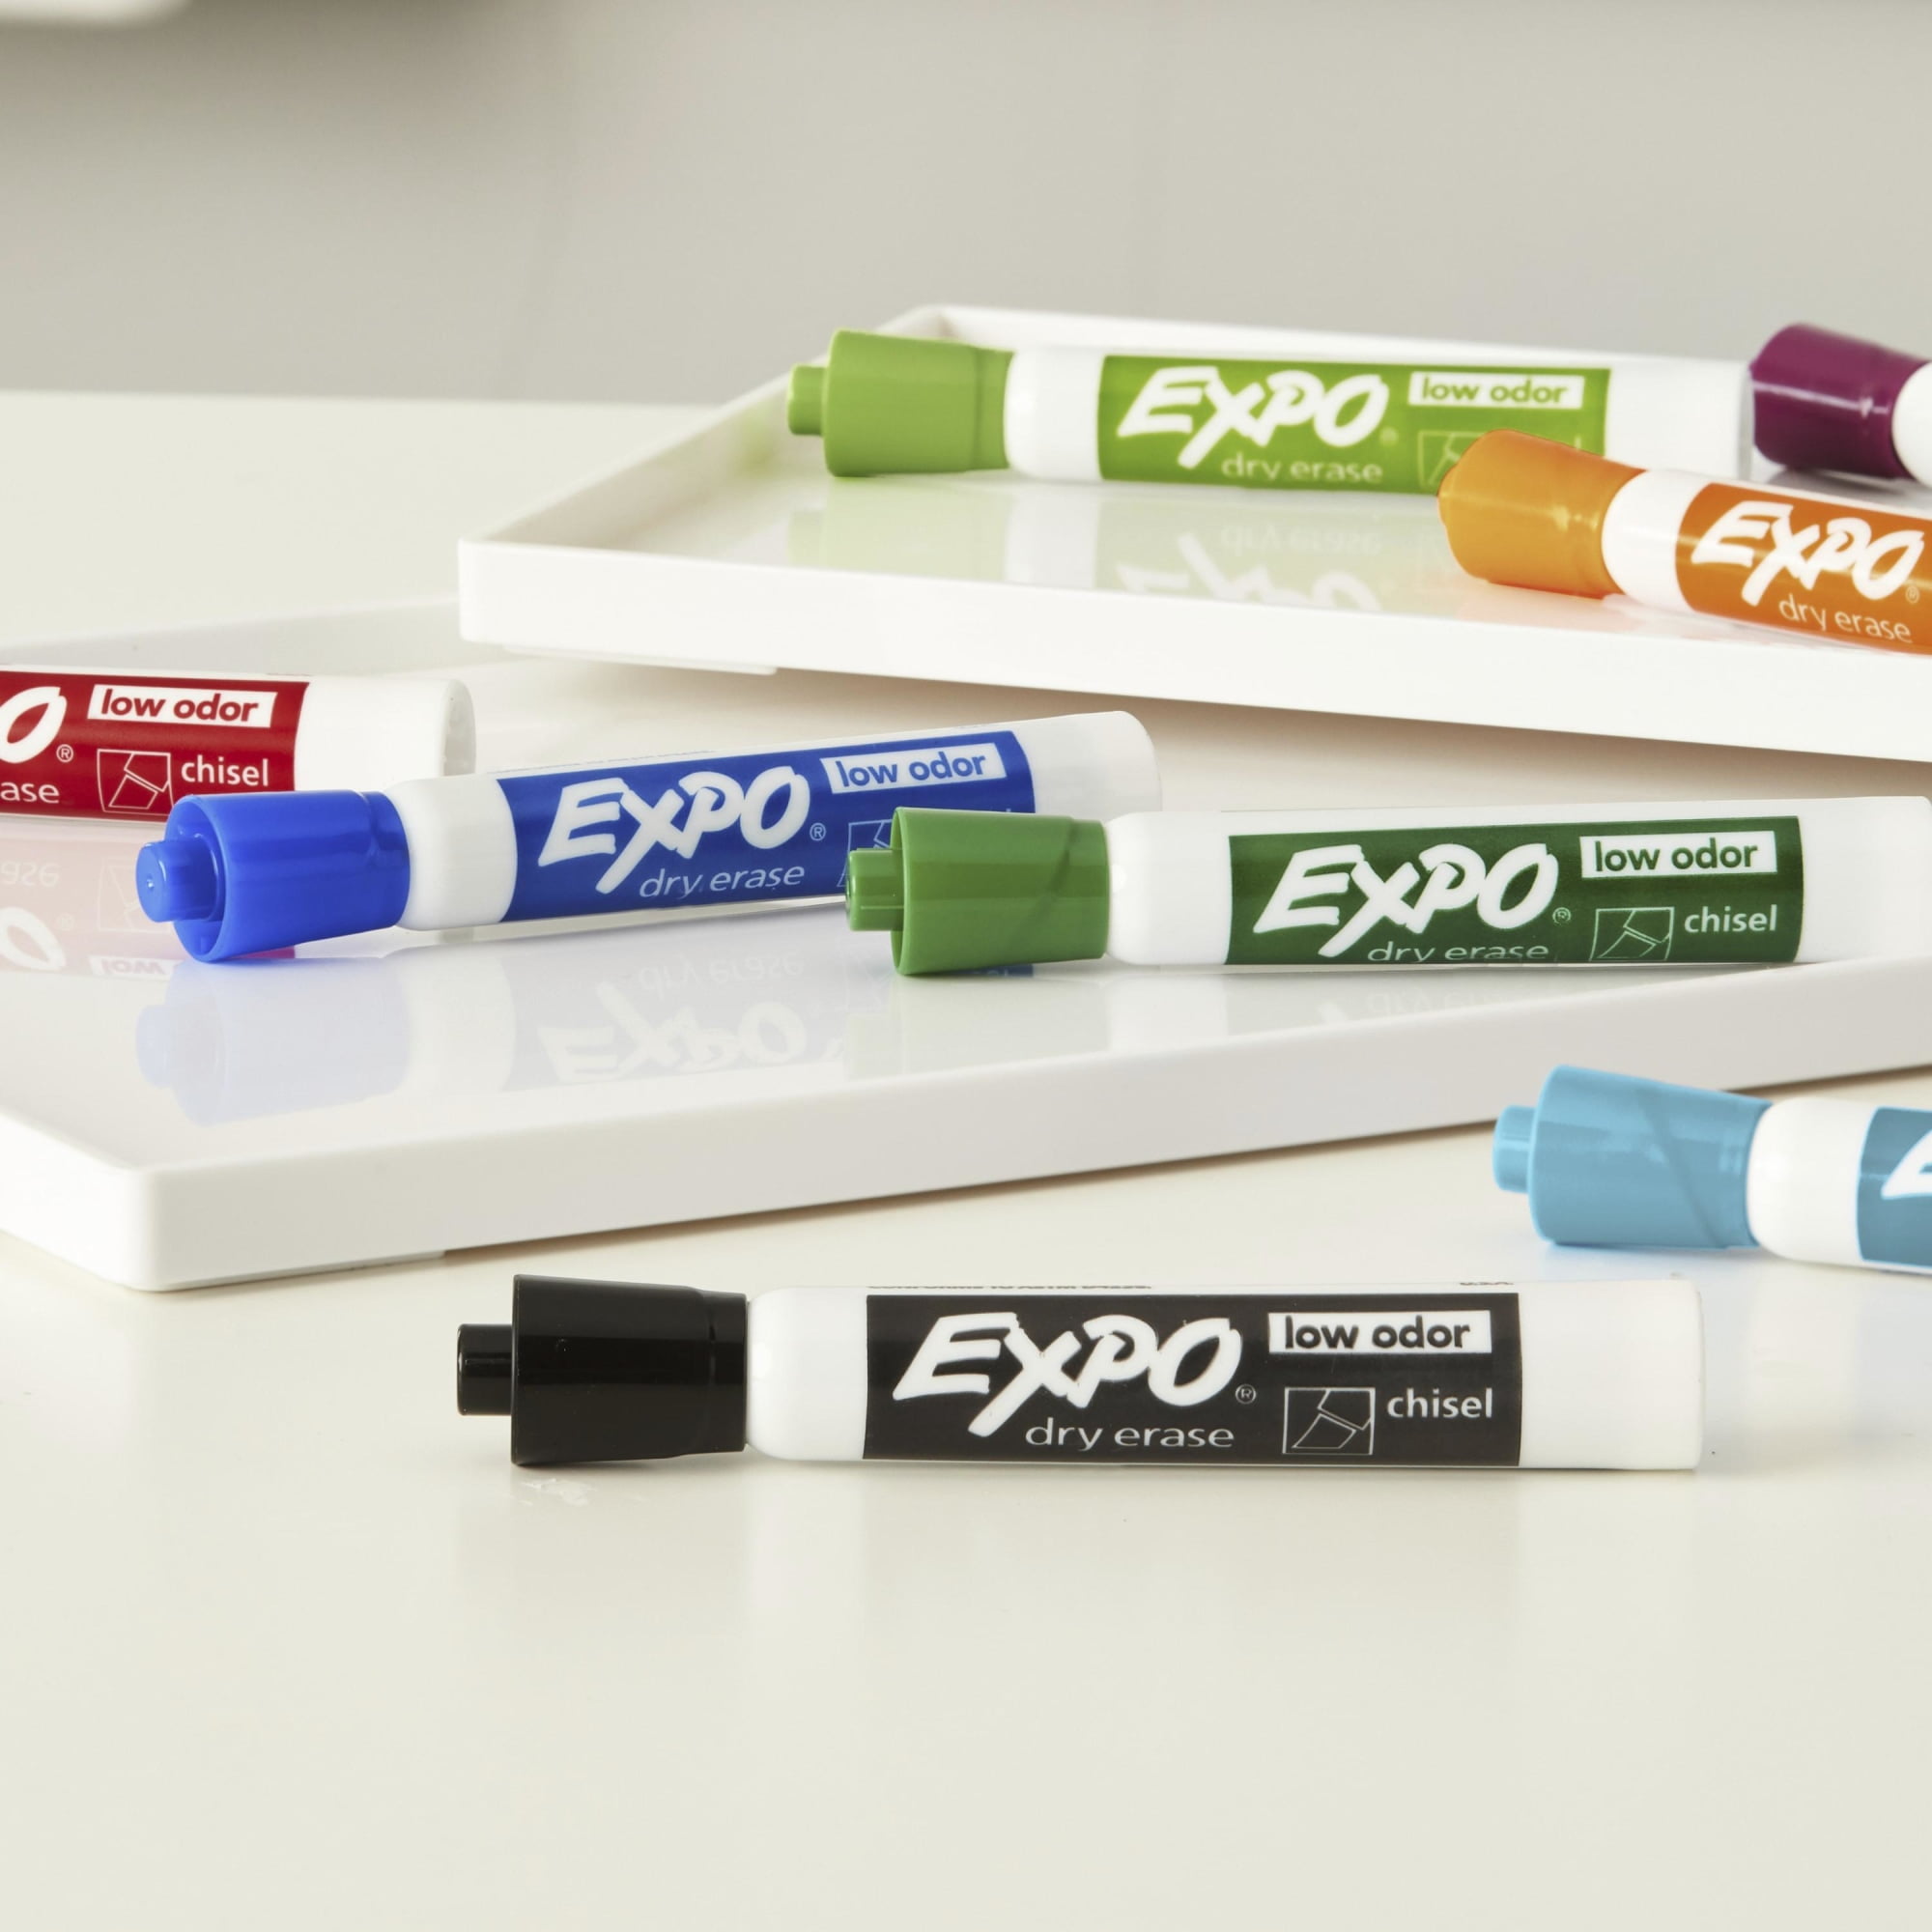 Black Dry Erase Markers by Universal UNV43671